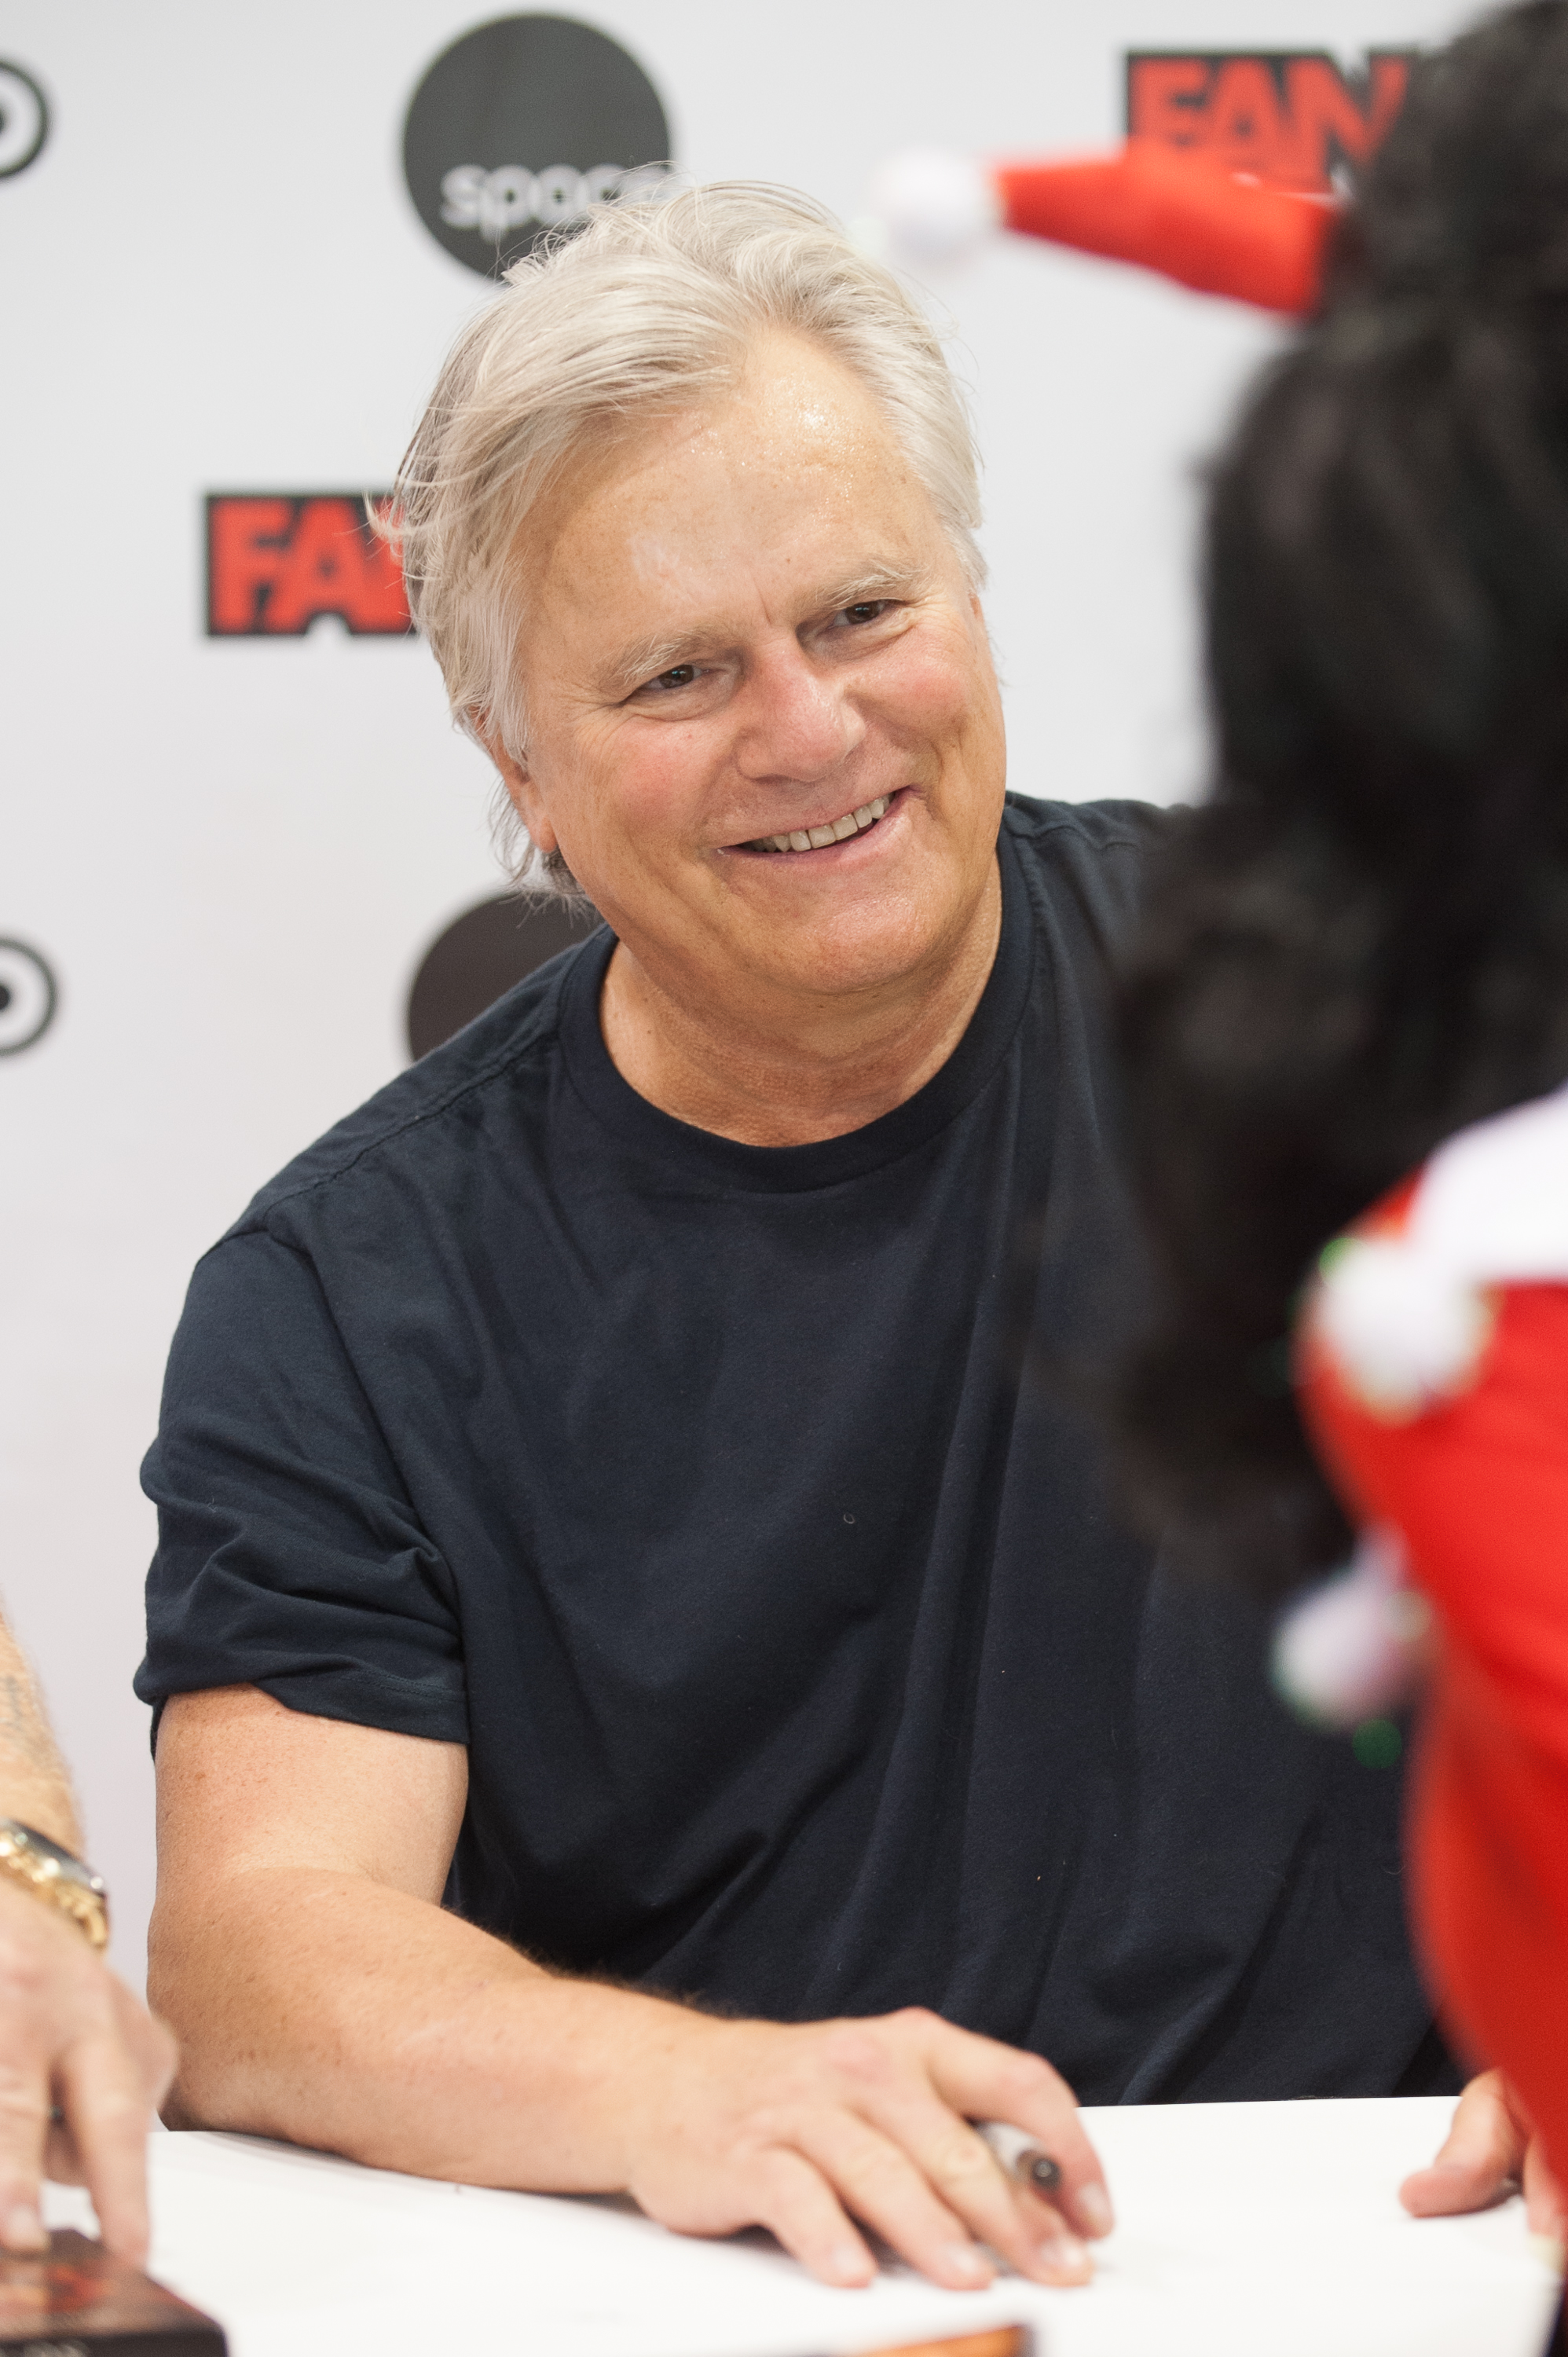 Richard Dean Anderson attends the Fan Expo Canada at Metro Toronto Convention Centre in Toronto, Canada, on September 1, 2018. | Source: Getty Images